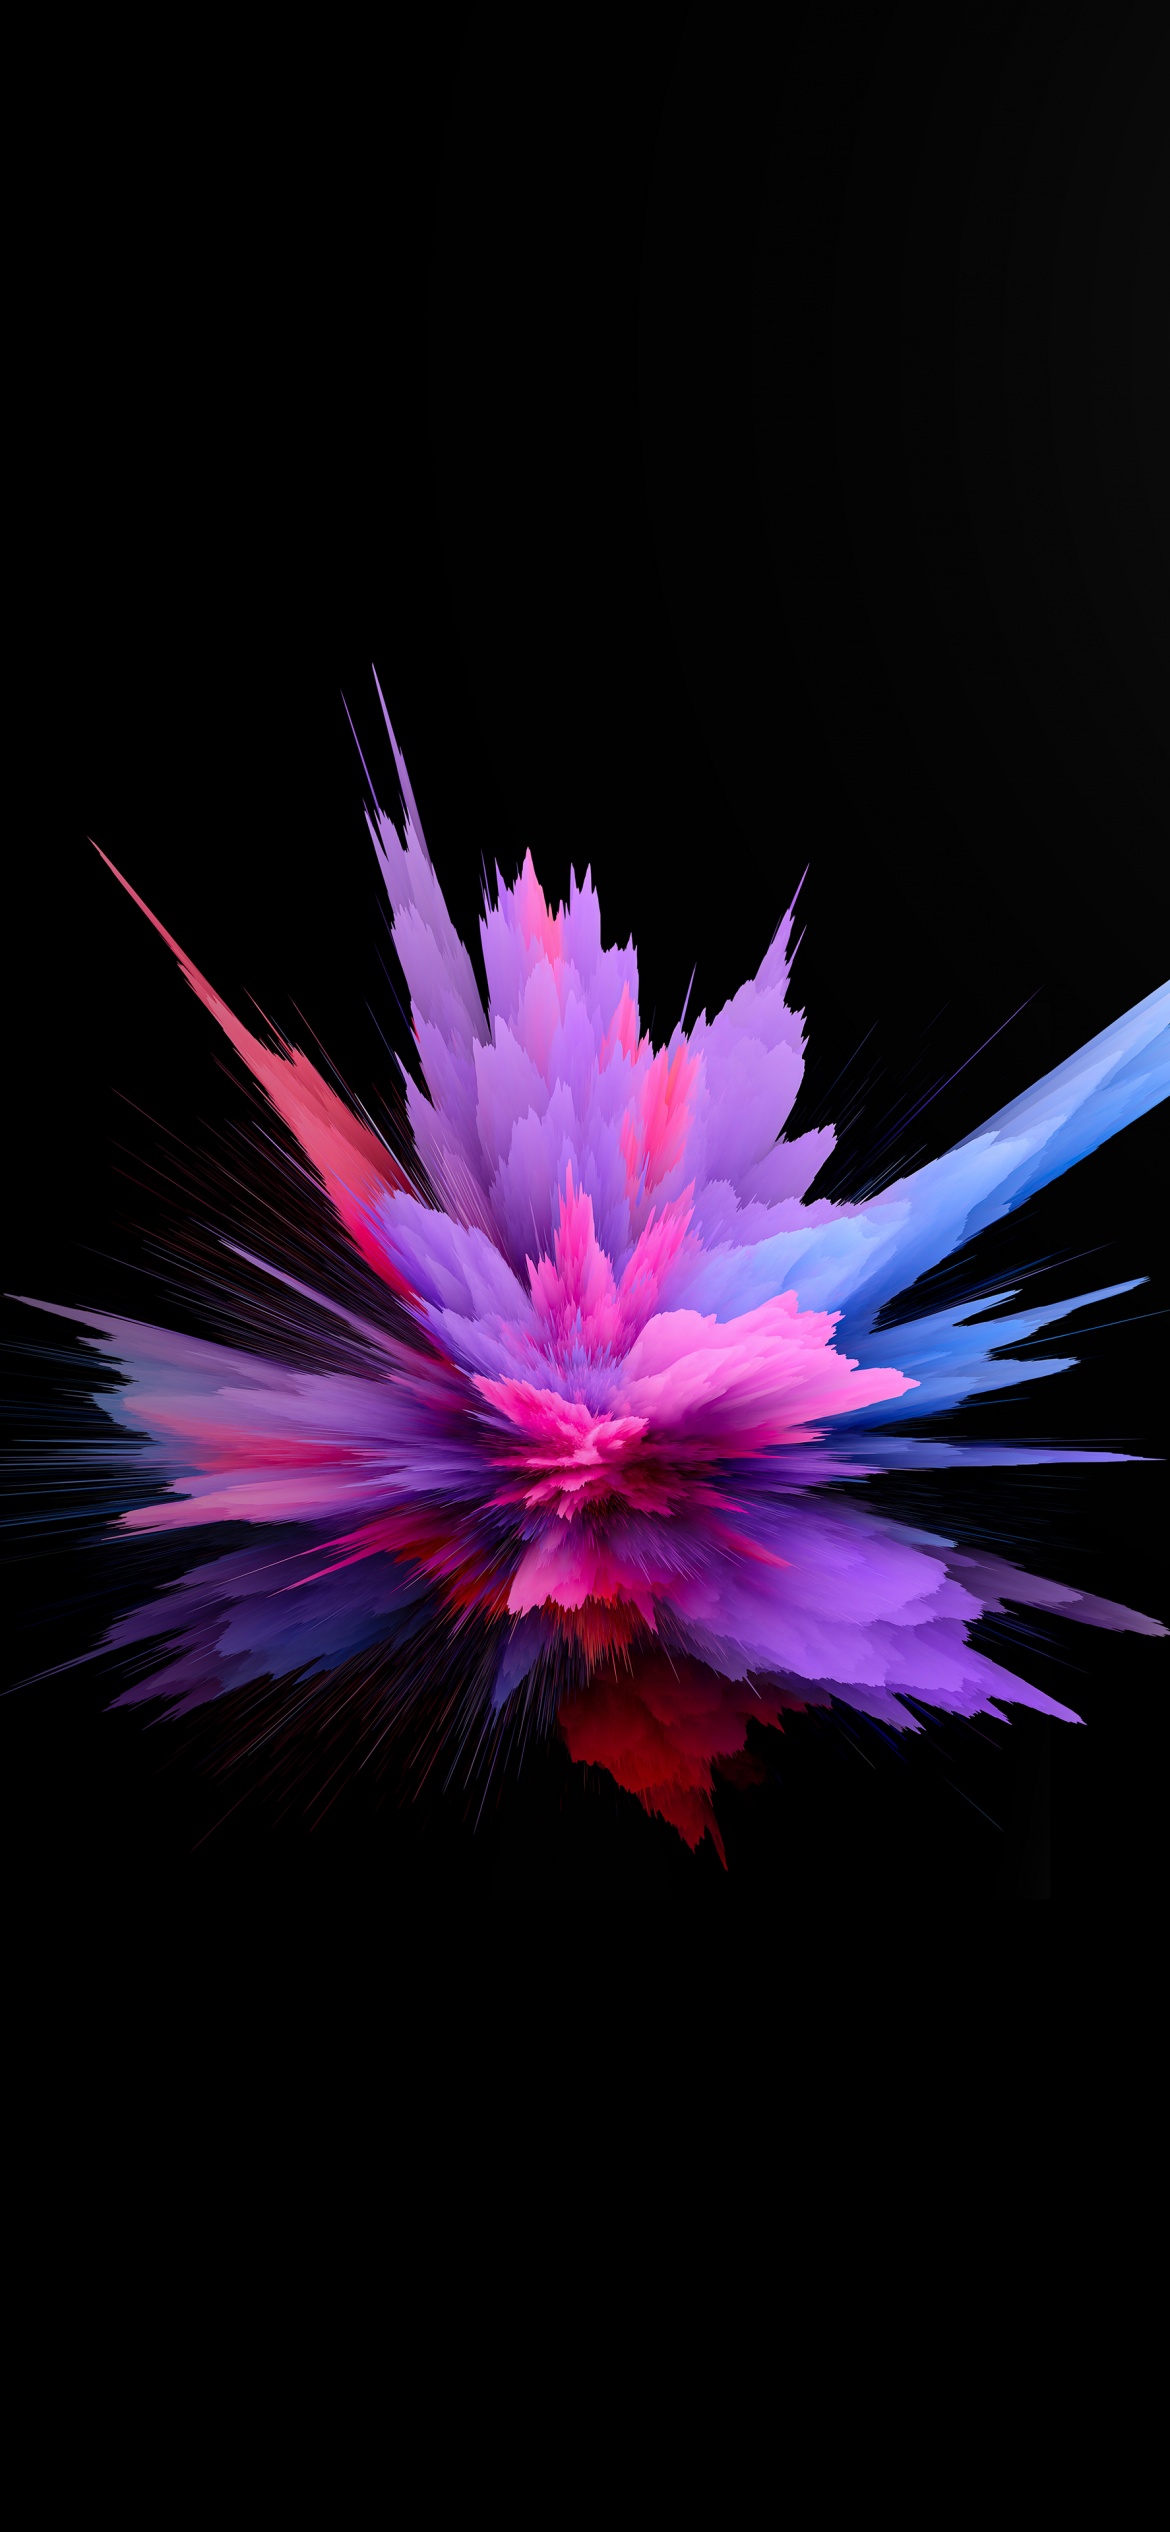 Color burst Wallpaper 4K, Colorful, Explosion, Abstract, #6671